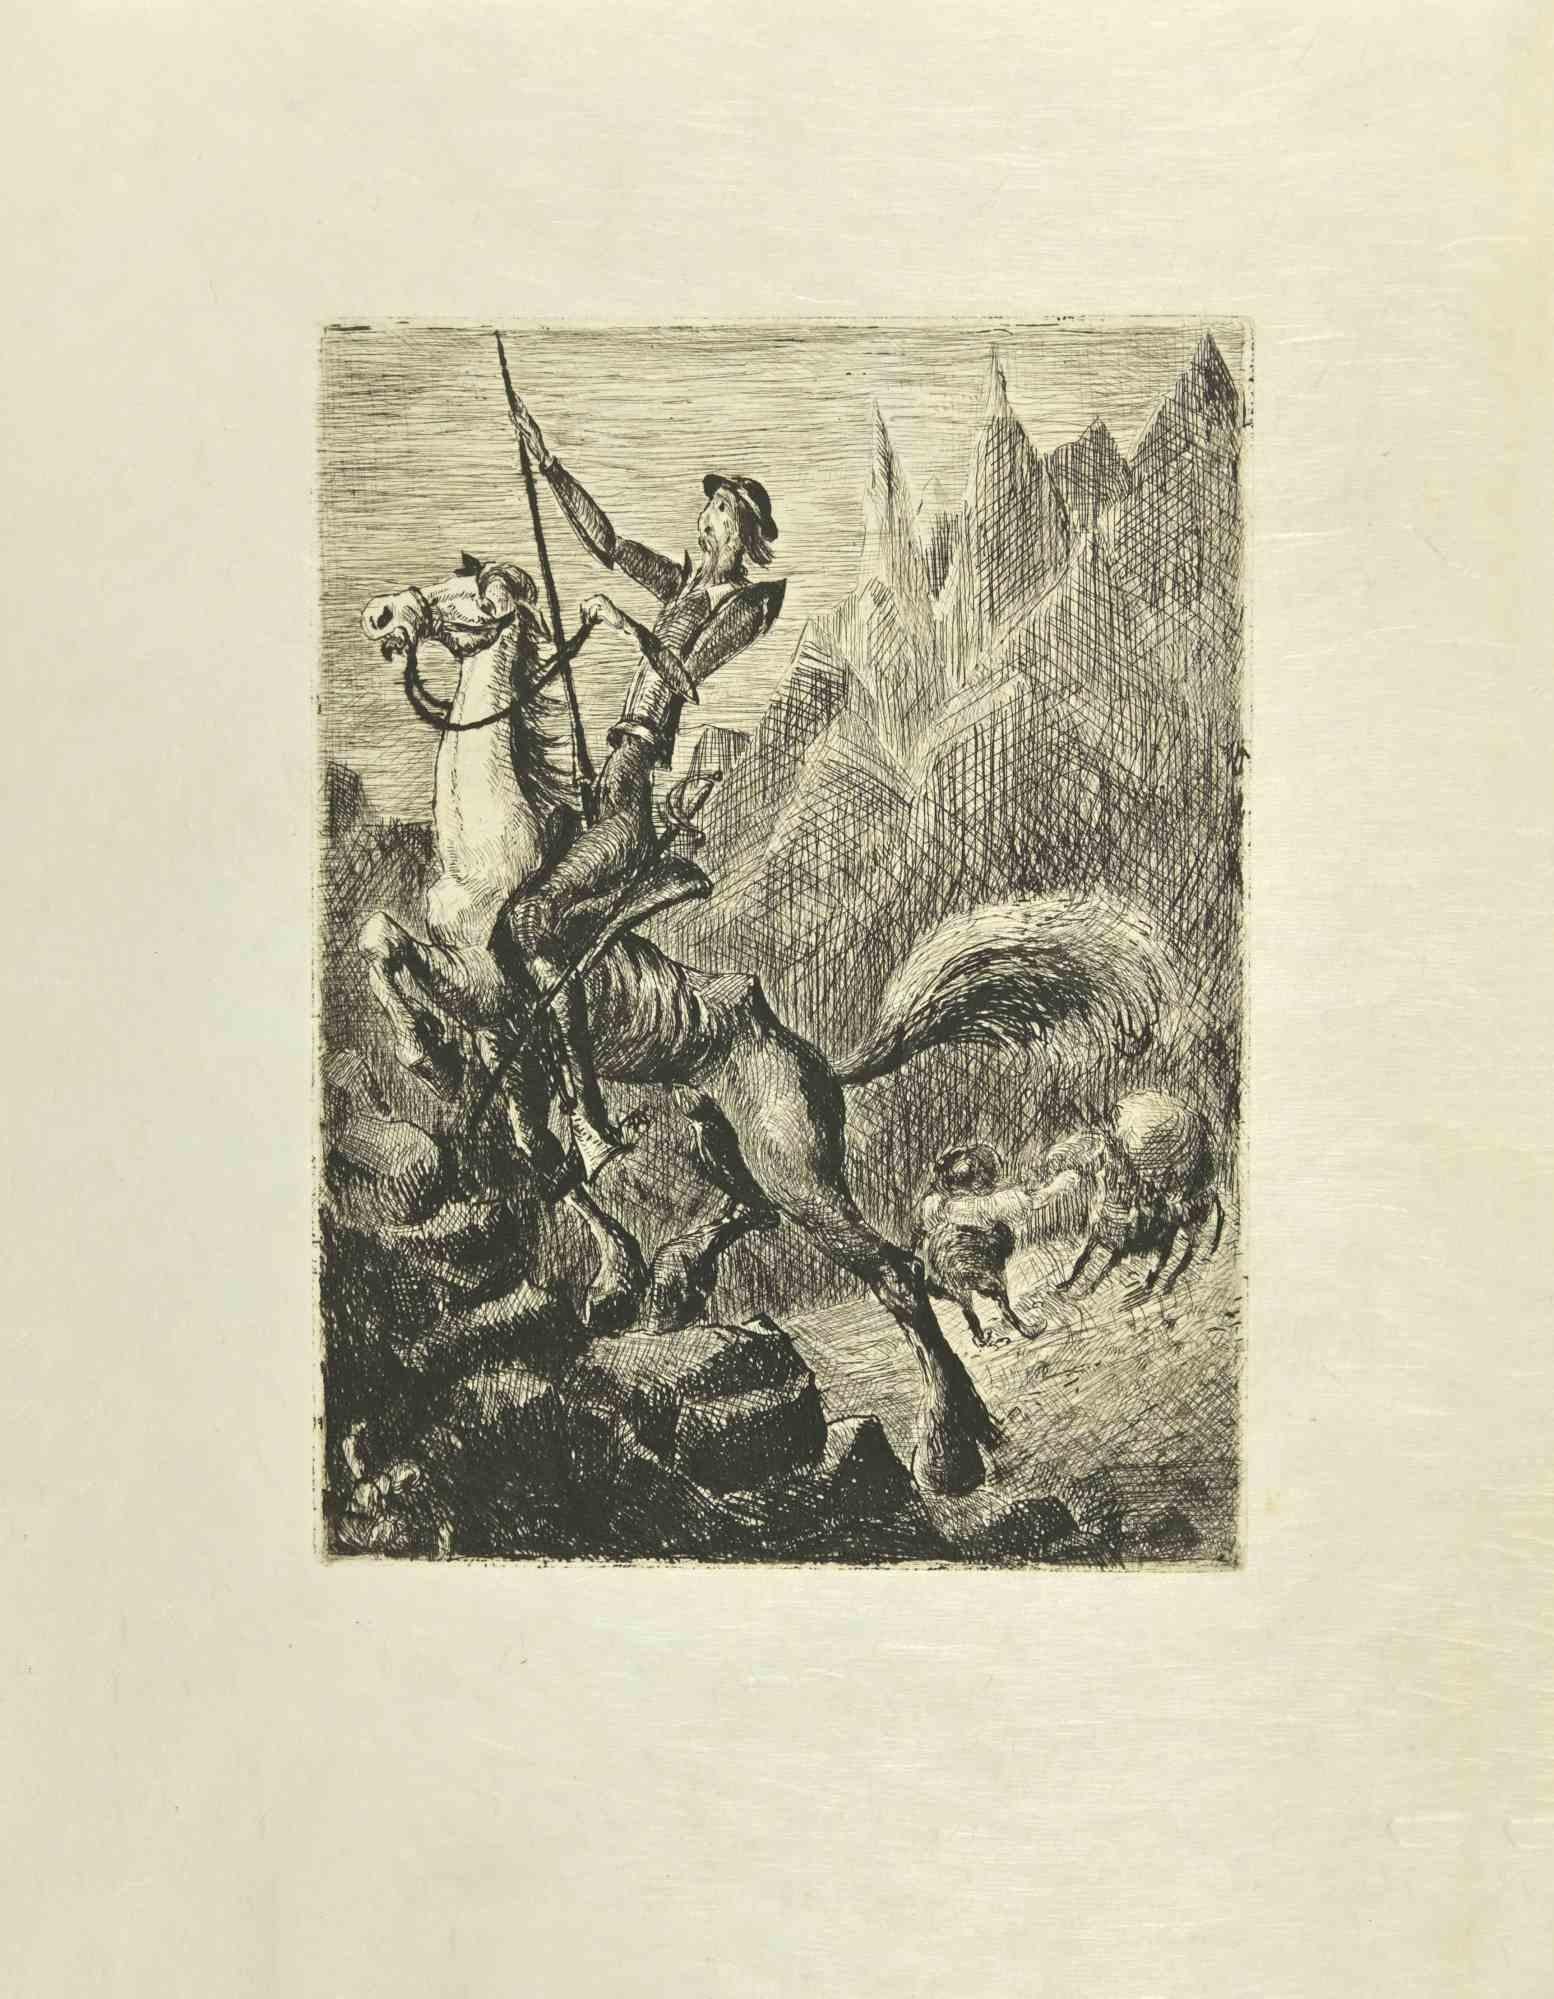 Don Quixote is an etching and drypoint print on ivory-colored Japanese paper, realized by Wladyslaw Jahl in 1951.

It belongs to a limited edition of 125 specimens.

Good conditions.

The artwork represents a visual scene from Don Quixote Book that